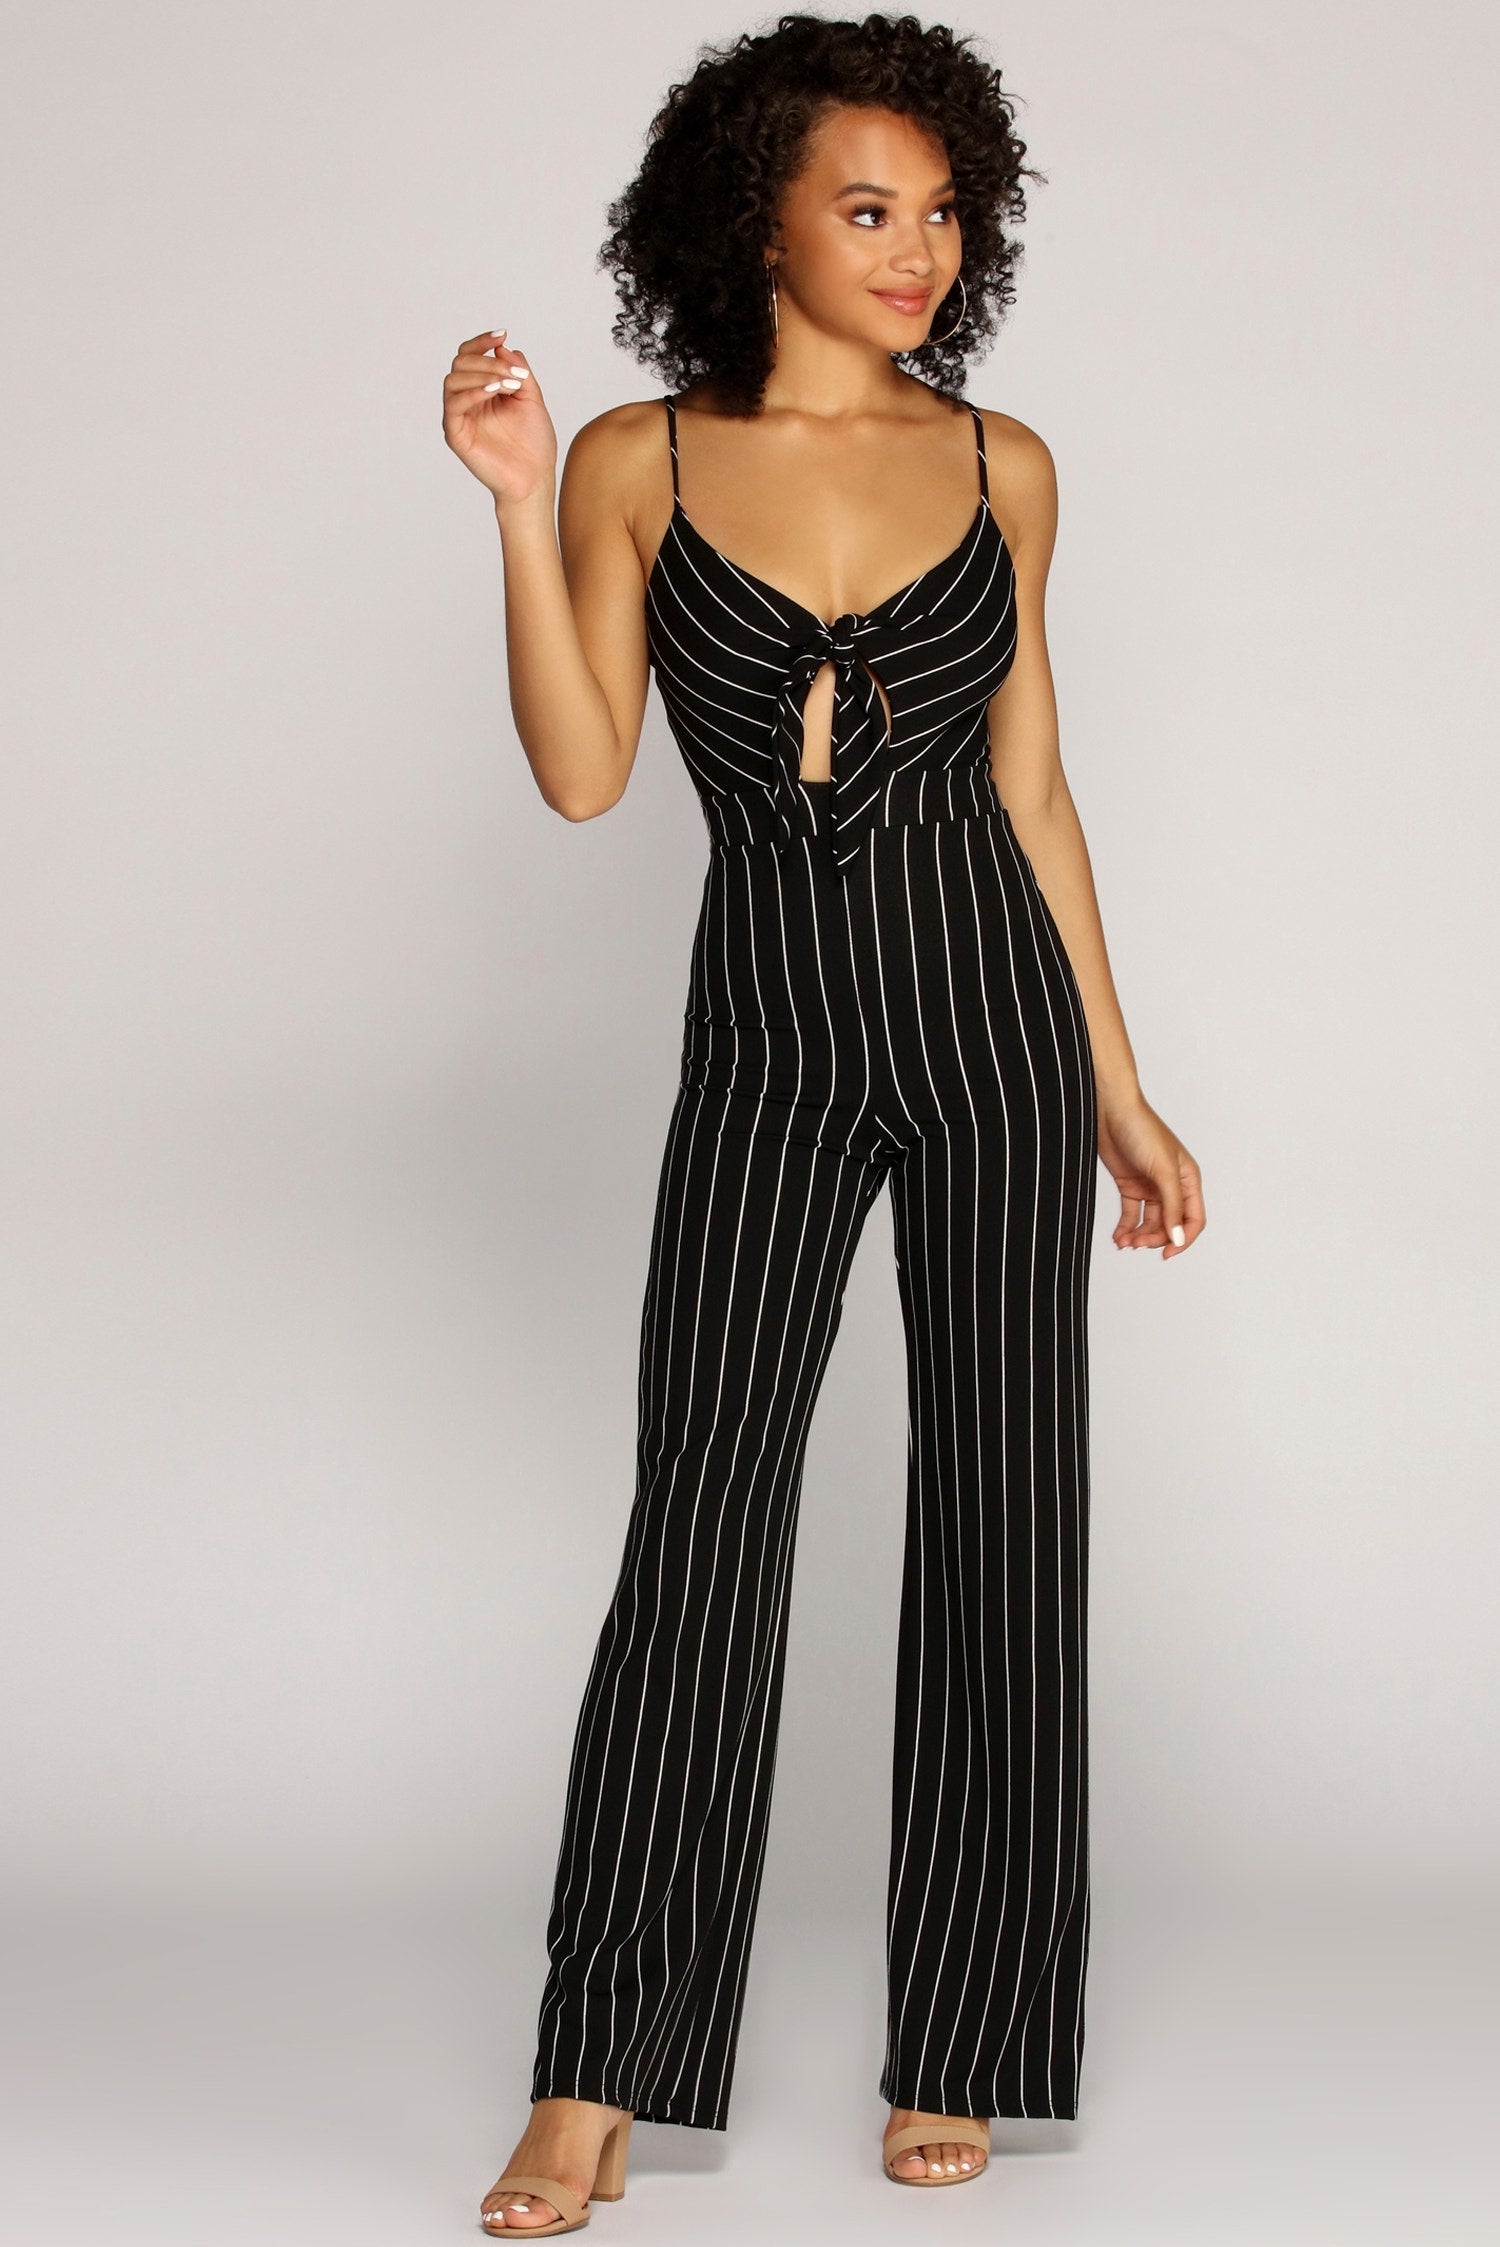 All For One Striped Jumpsuit